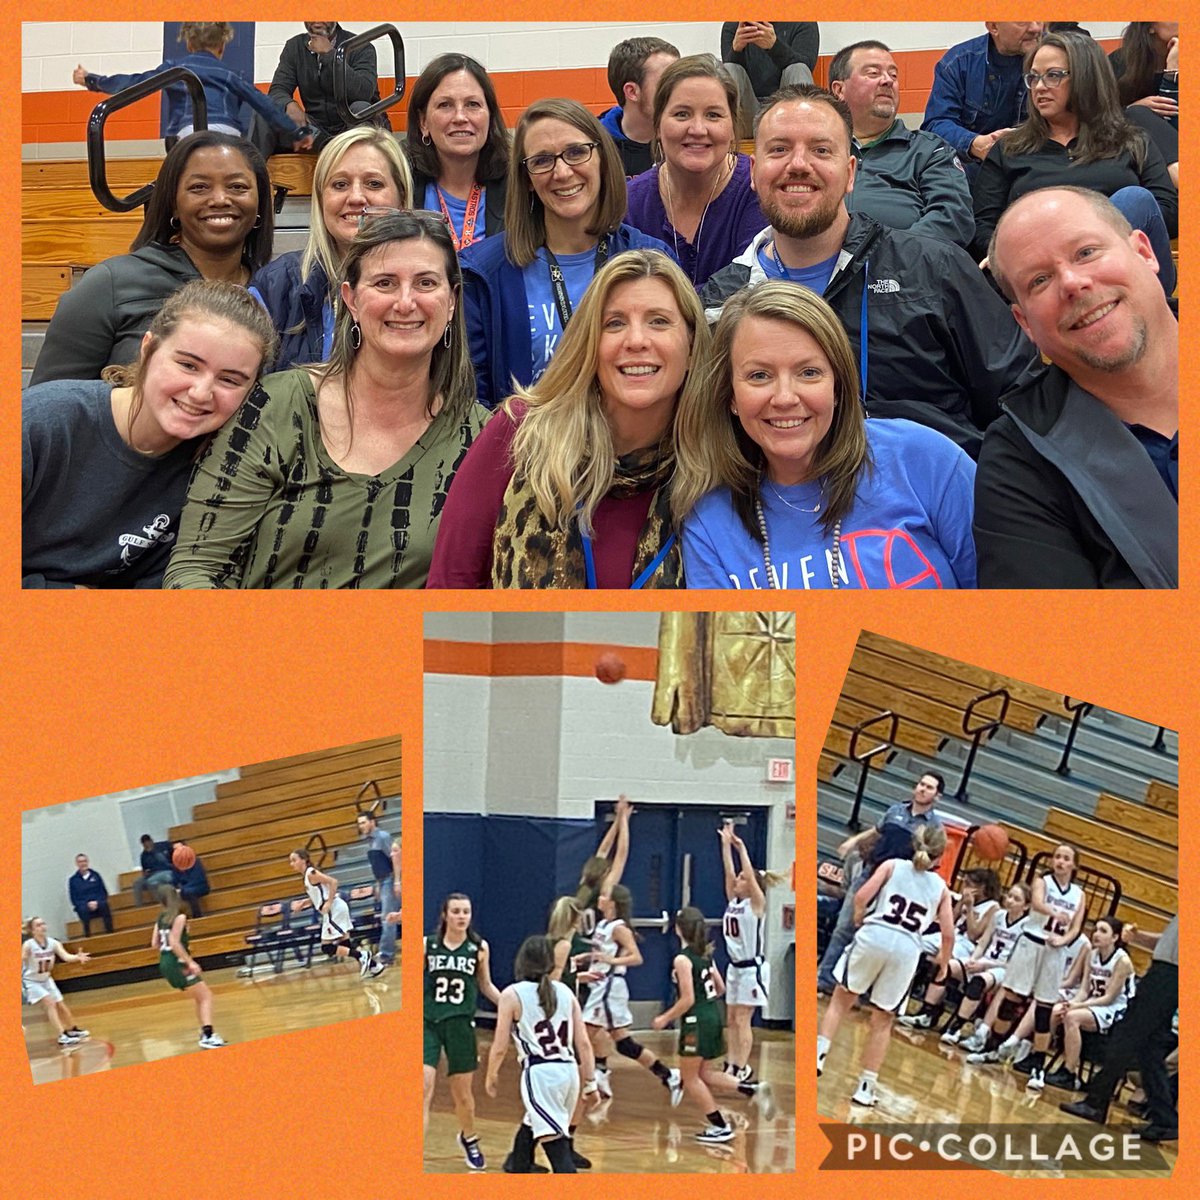 @spartan_speak 8B is leaving it all on the court. Way to represent ladies! #7LJHpride teachers are cheering them on the spartan way!